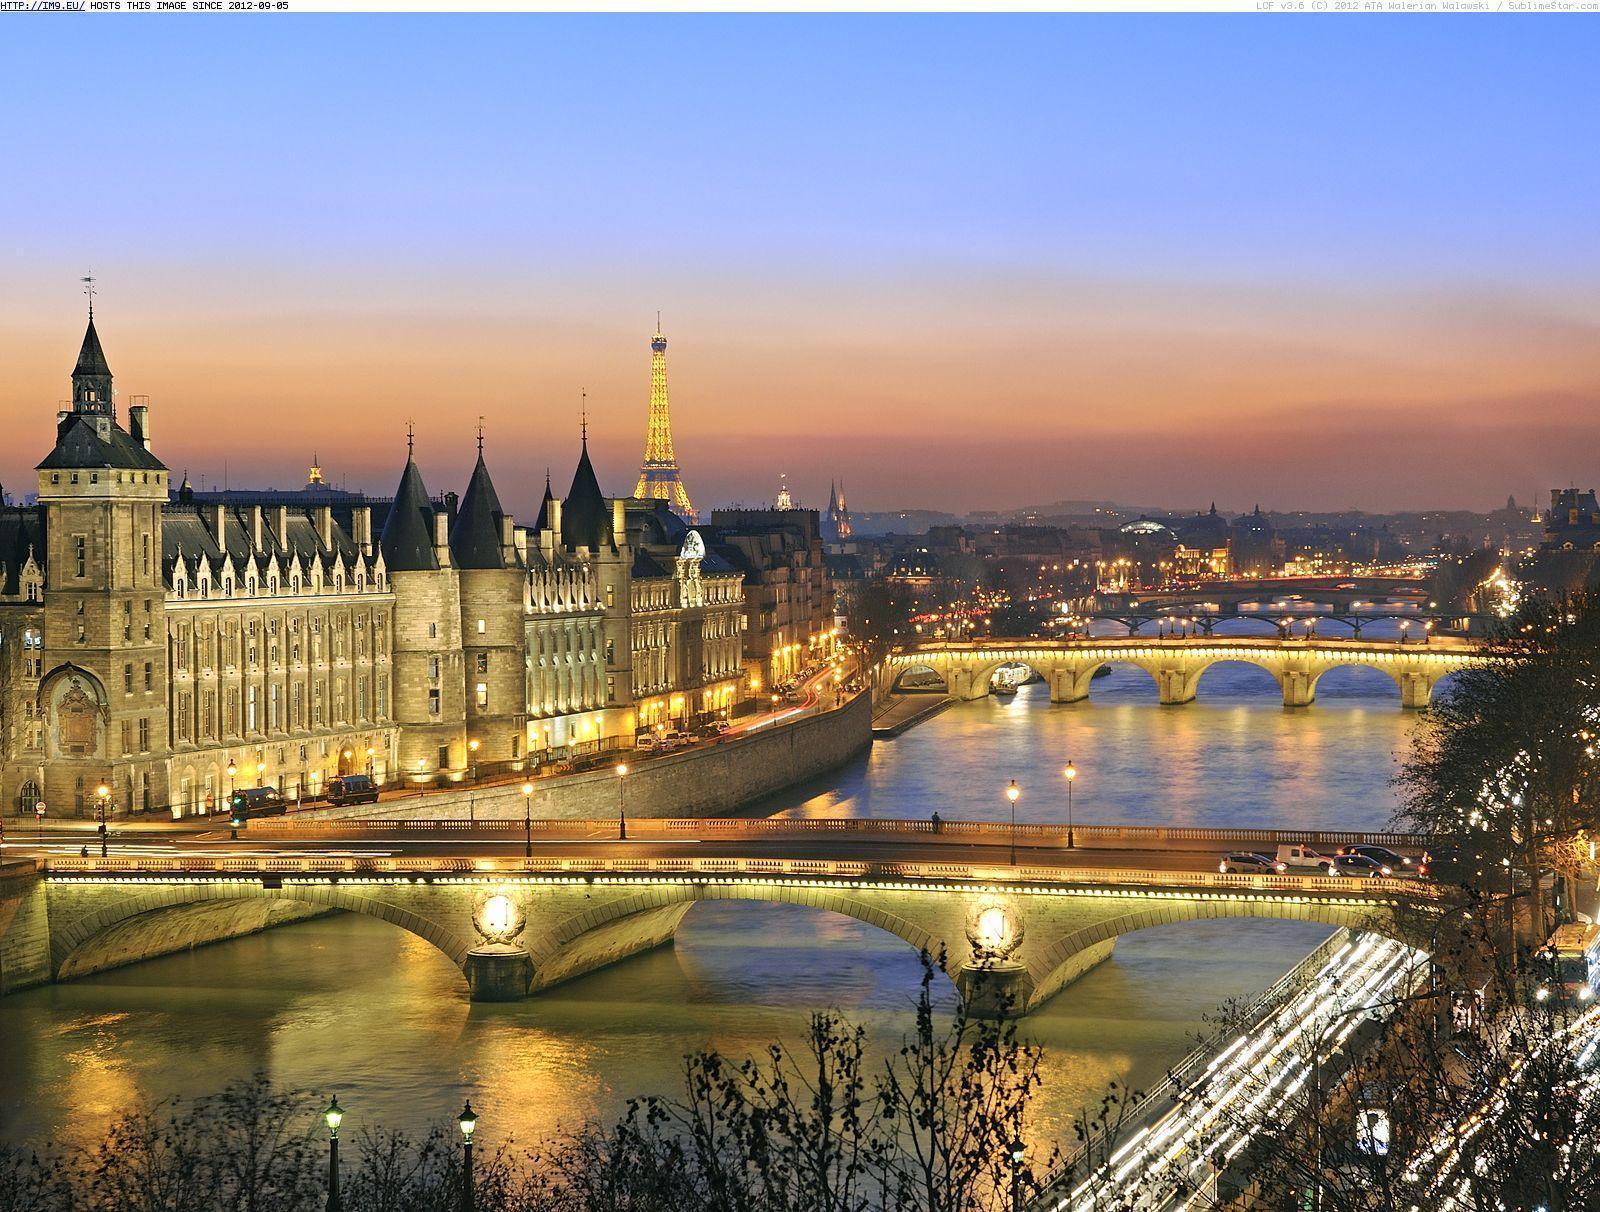 HD Seine River Wallpaper and Photo. HD Travelling Wallpaper